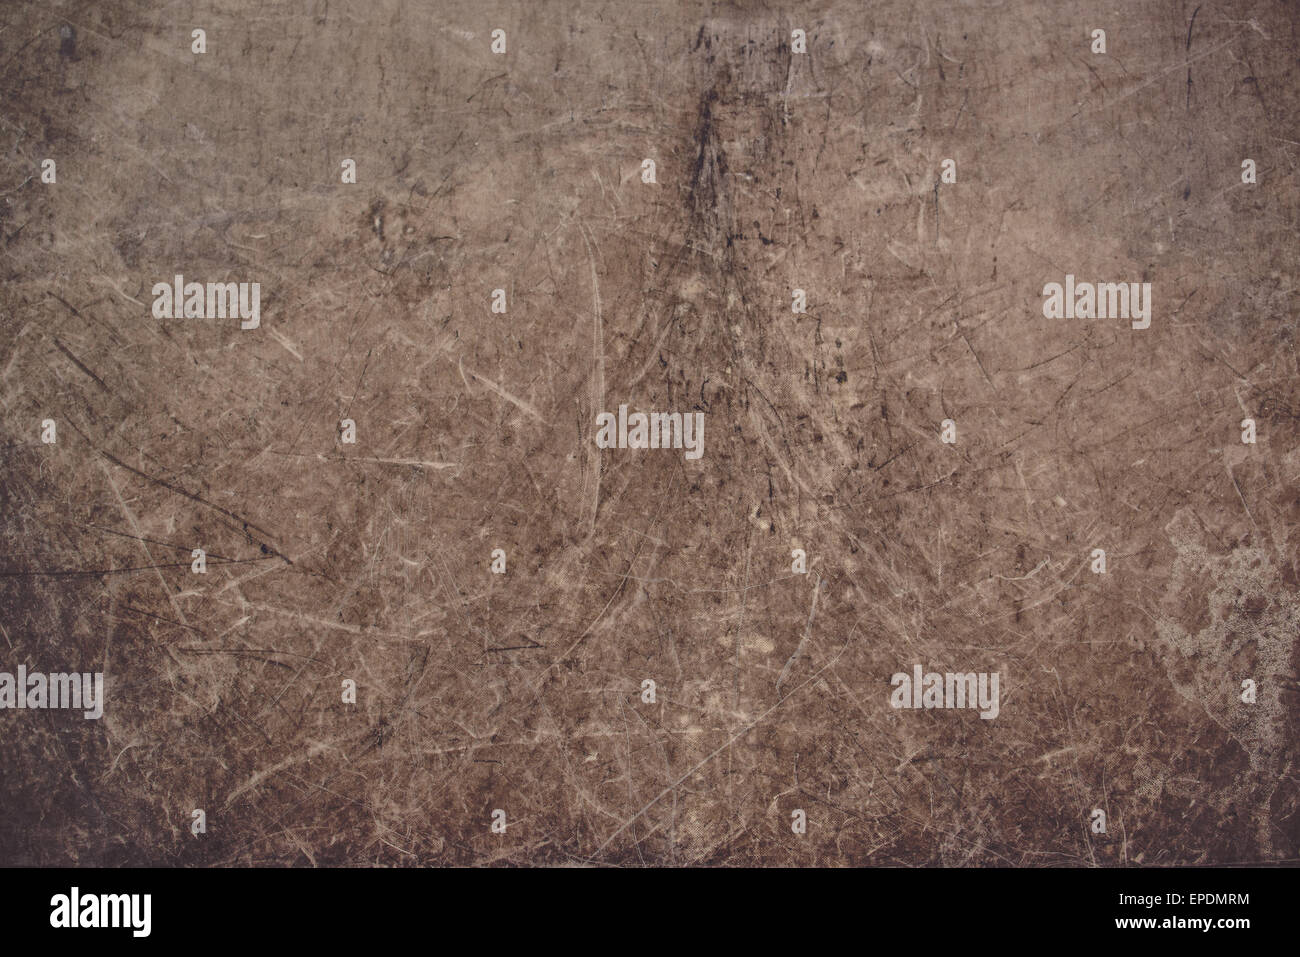 Grunge Obsolete Scratched Texture Background with Retro Brown Tone. Stock Photo